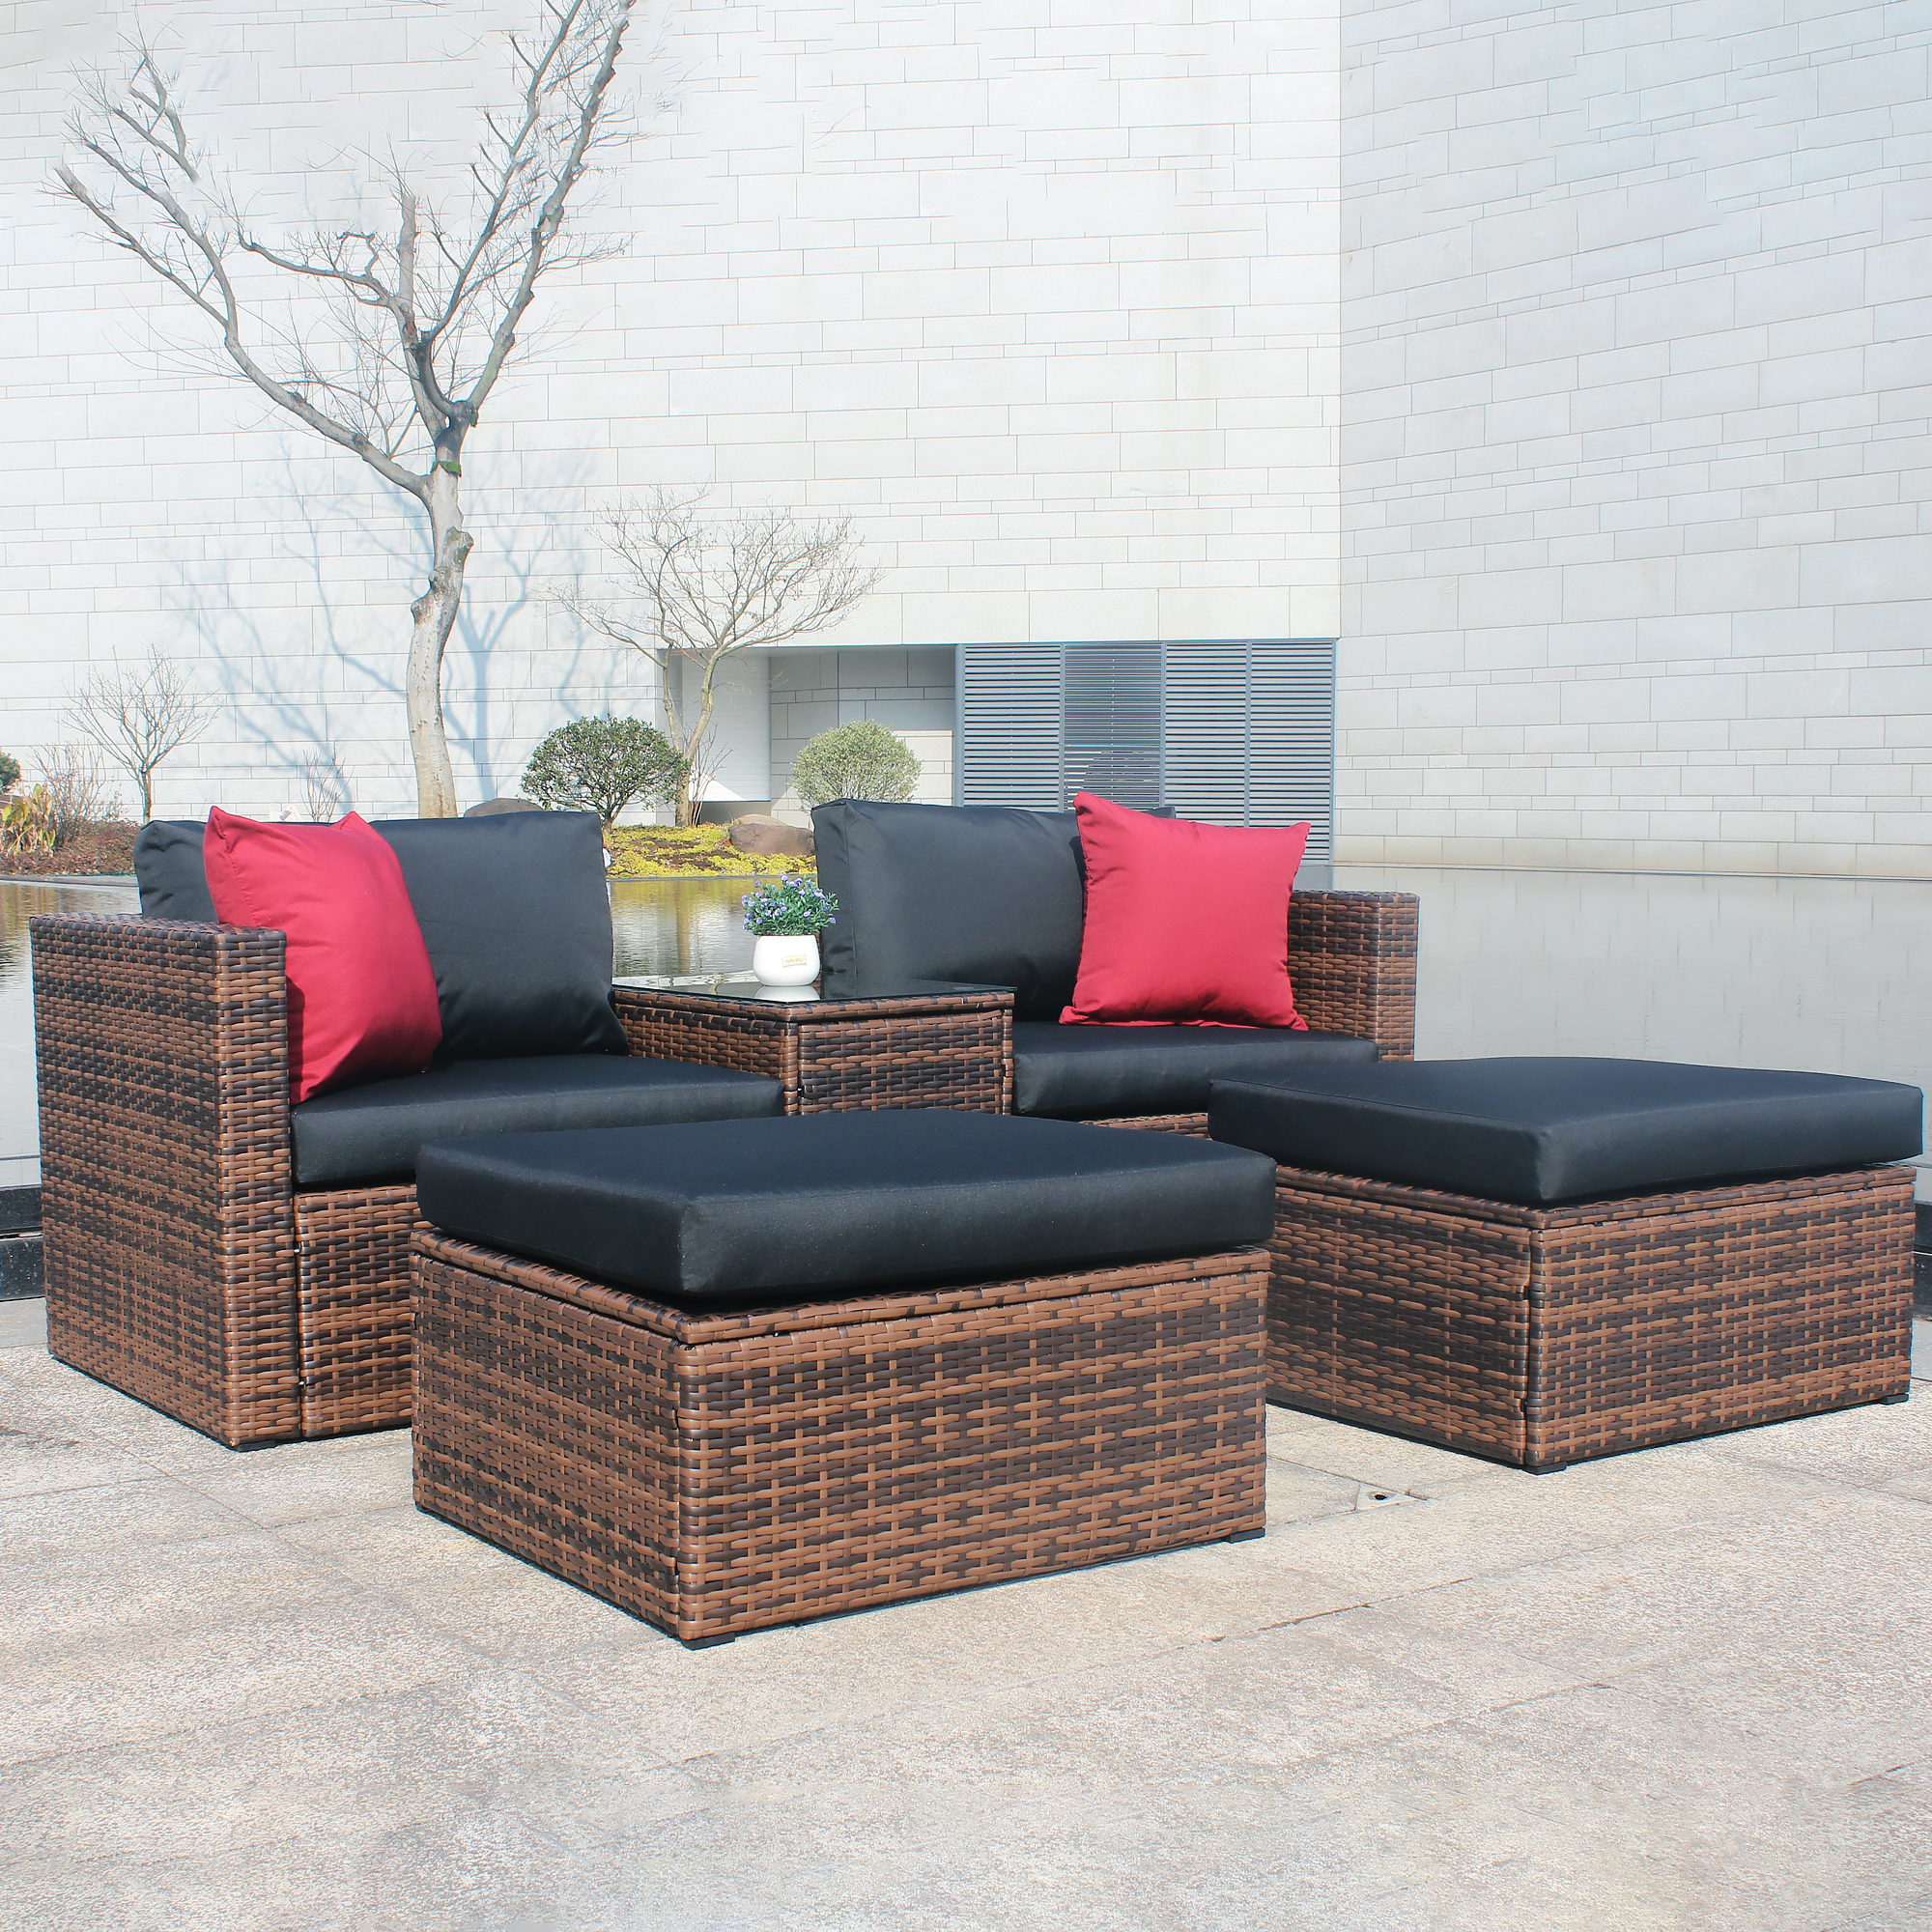 SESSLIFE 5 Piece Outdoor Wicker Sofa Set, Patio Sectional Furniture with Table, Ottoman and Rain Cover, Brown Rattan Lawn Porch Poolside Conversation Sets, TE2658 - image 1 of 5